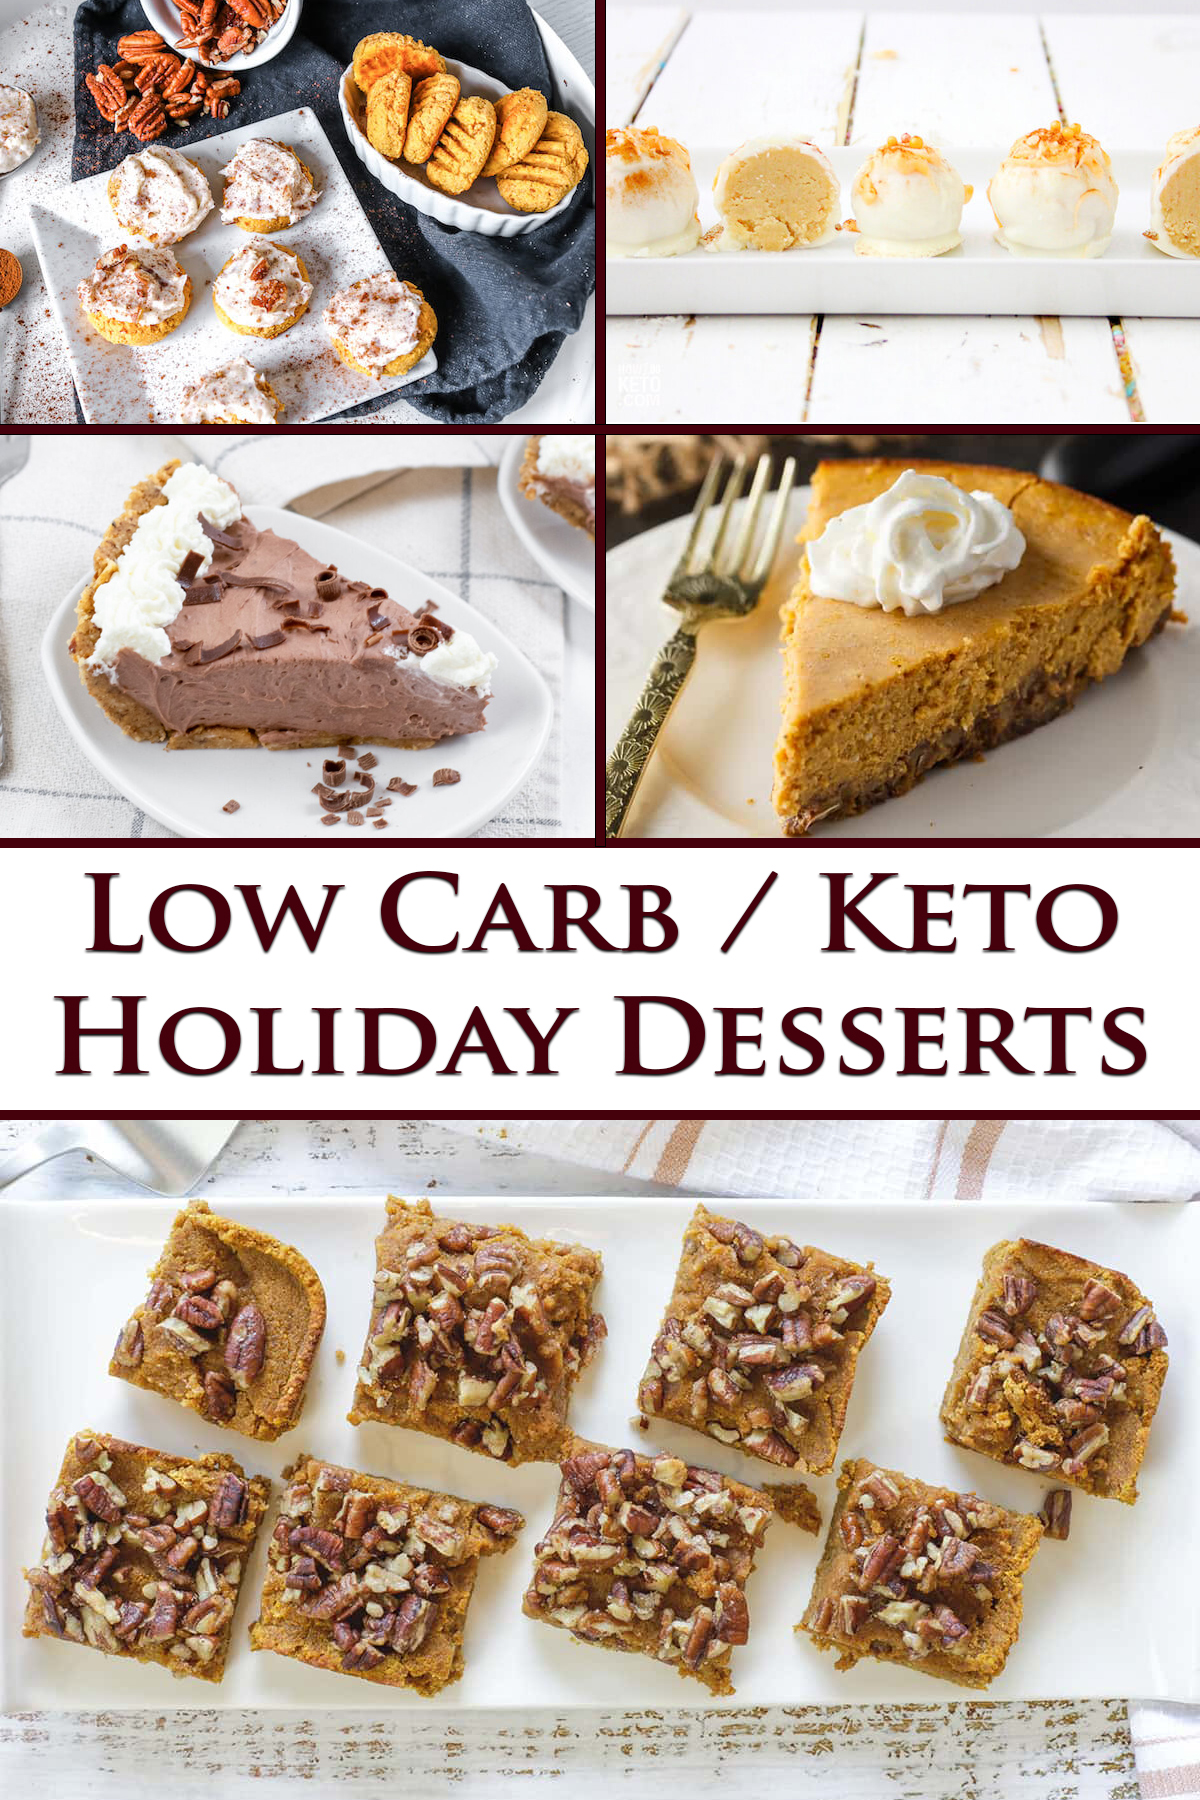 A collage image of various low carb holiday dessert recipes.